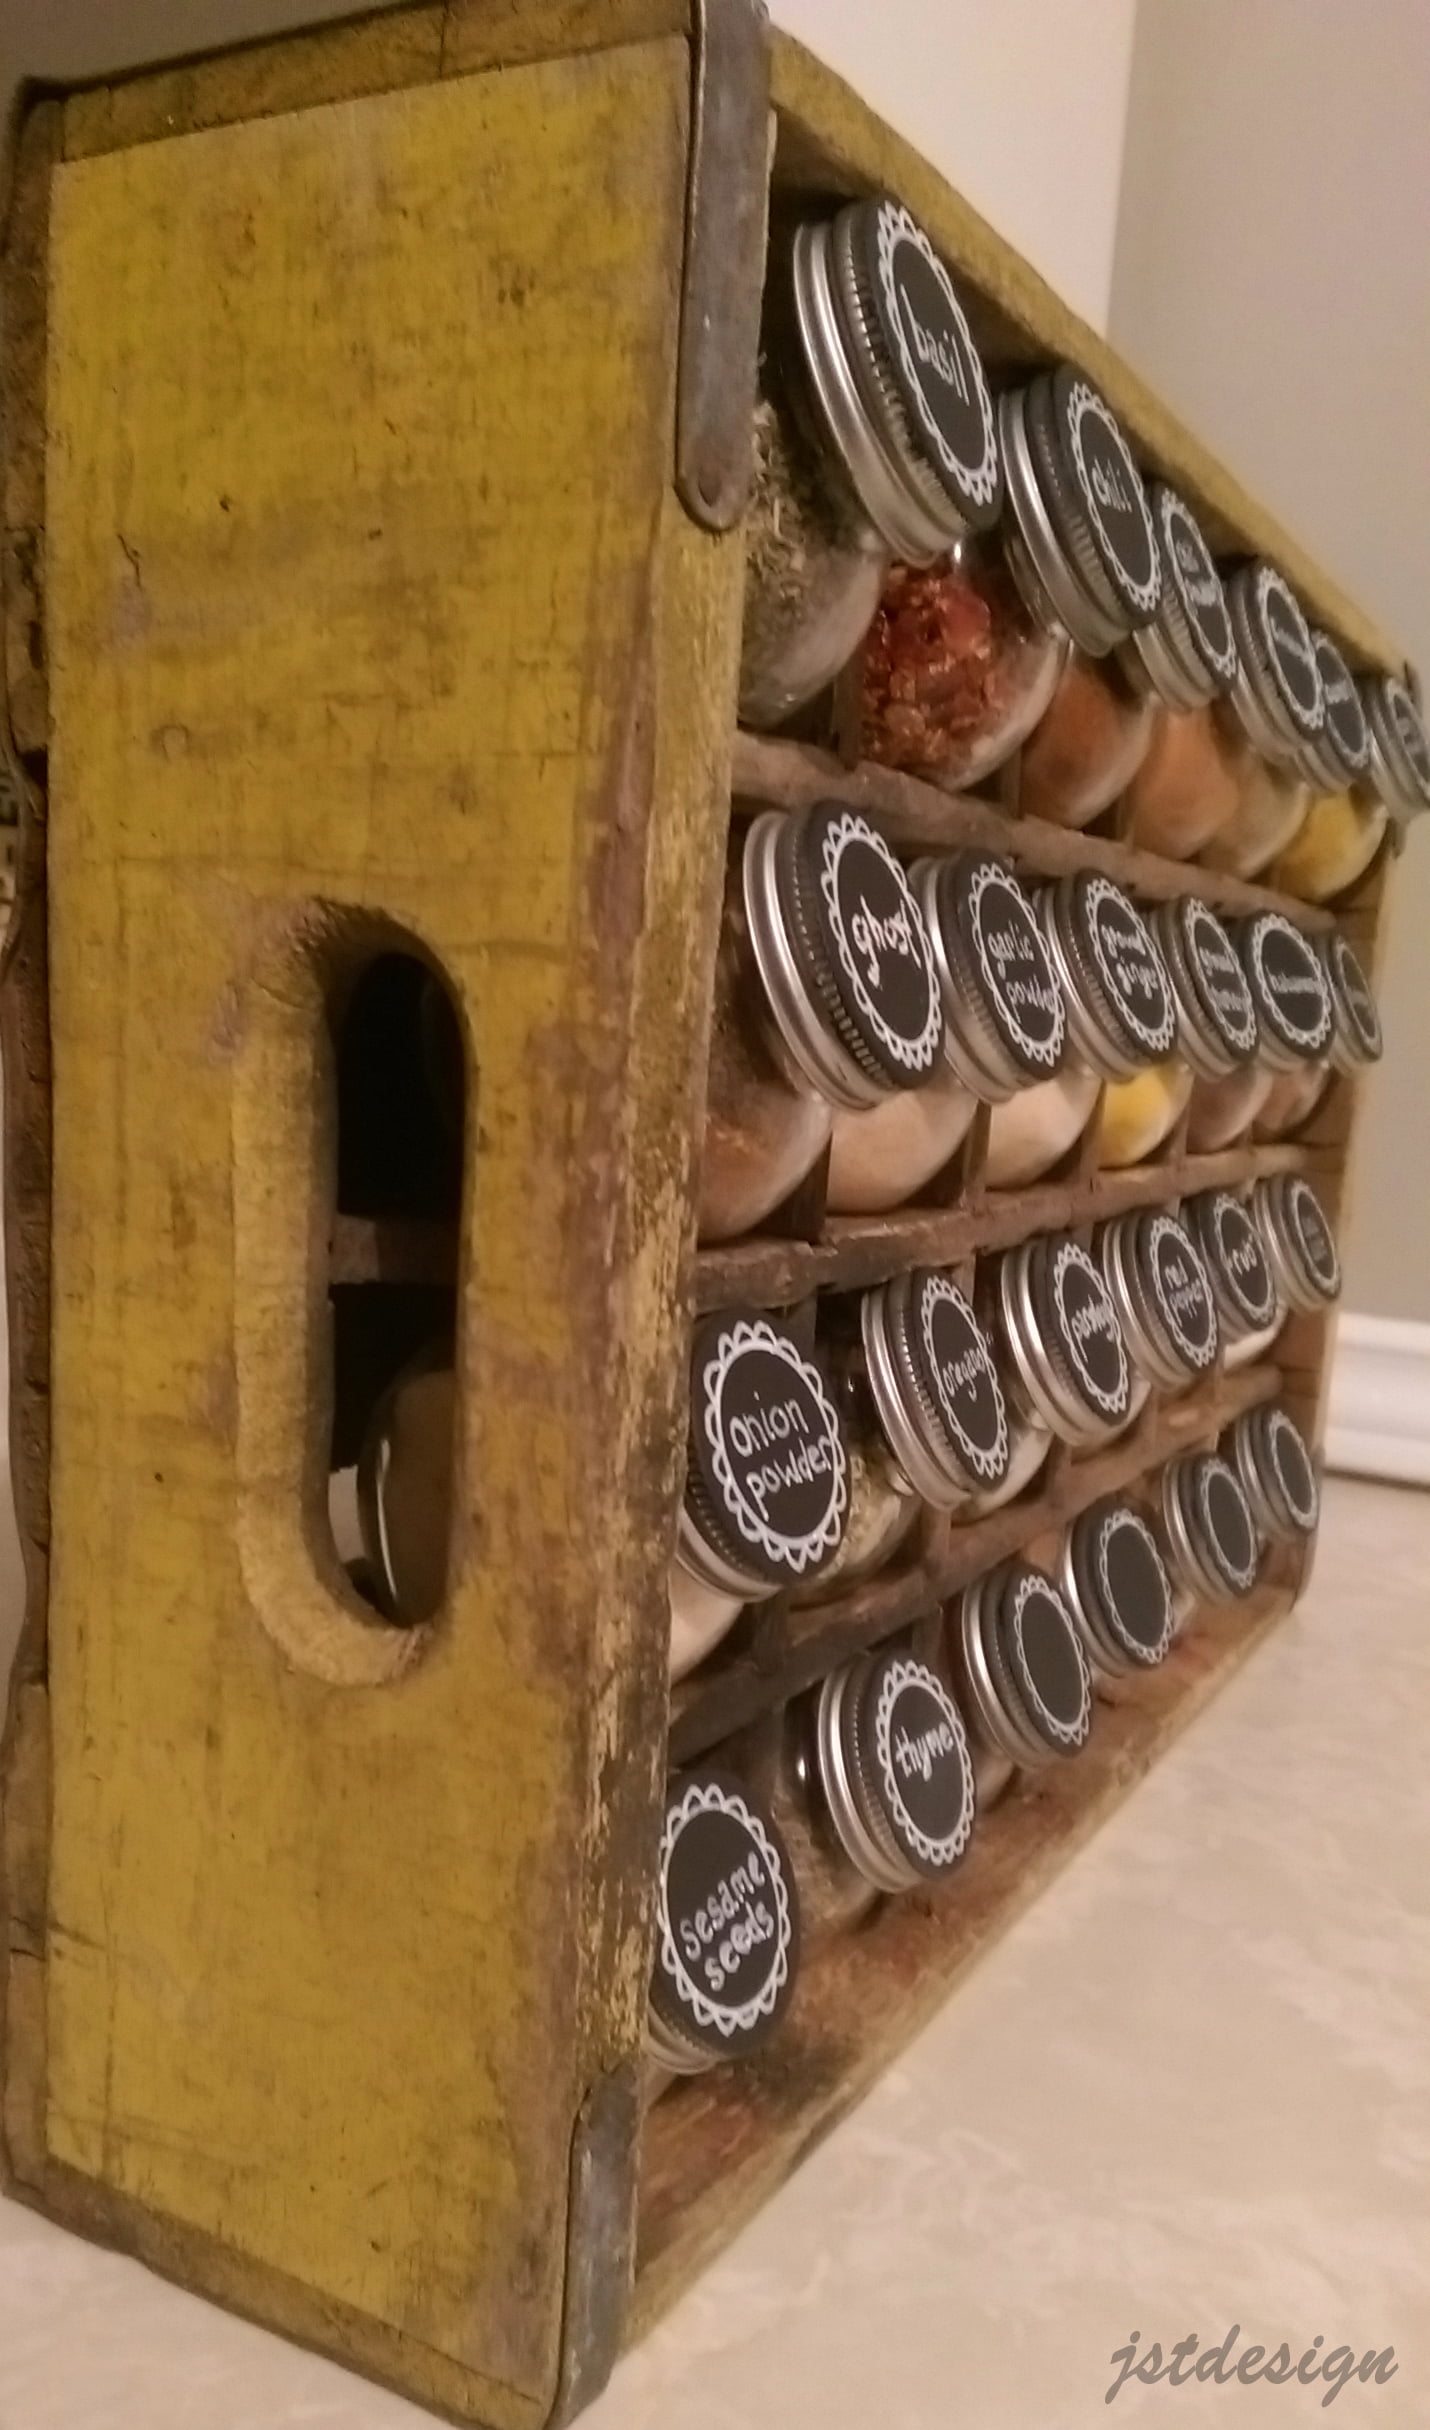 Distressed Wooden Crate Turned Spice Rack